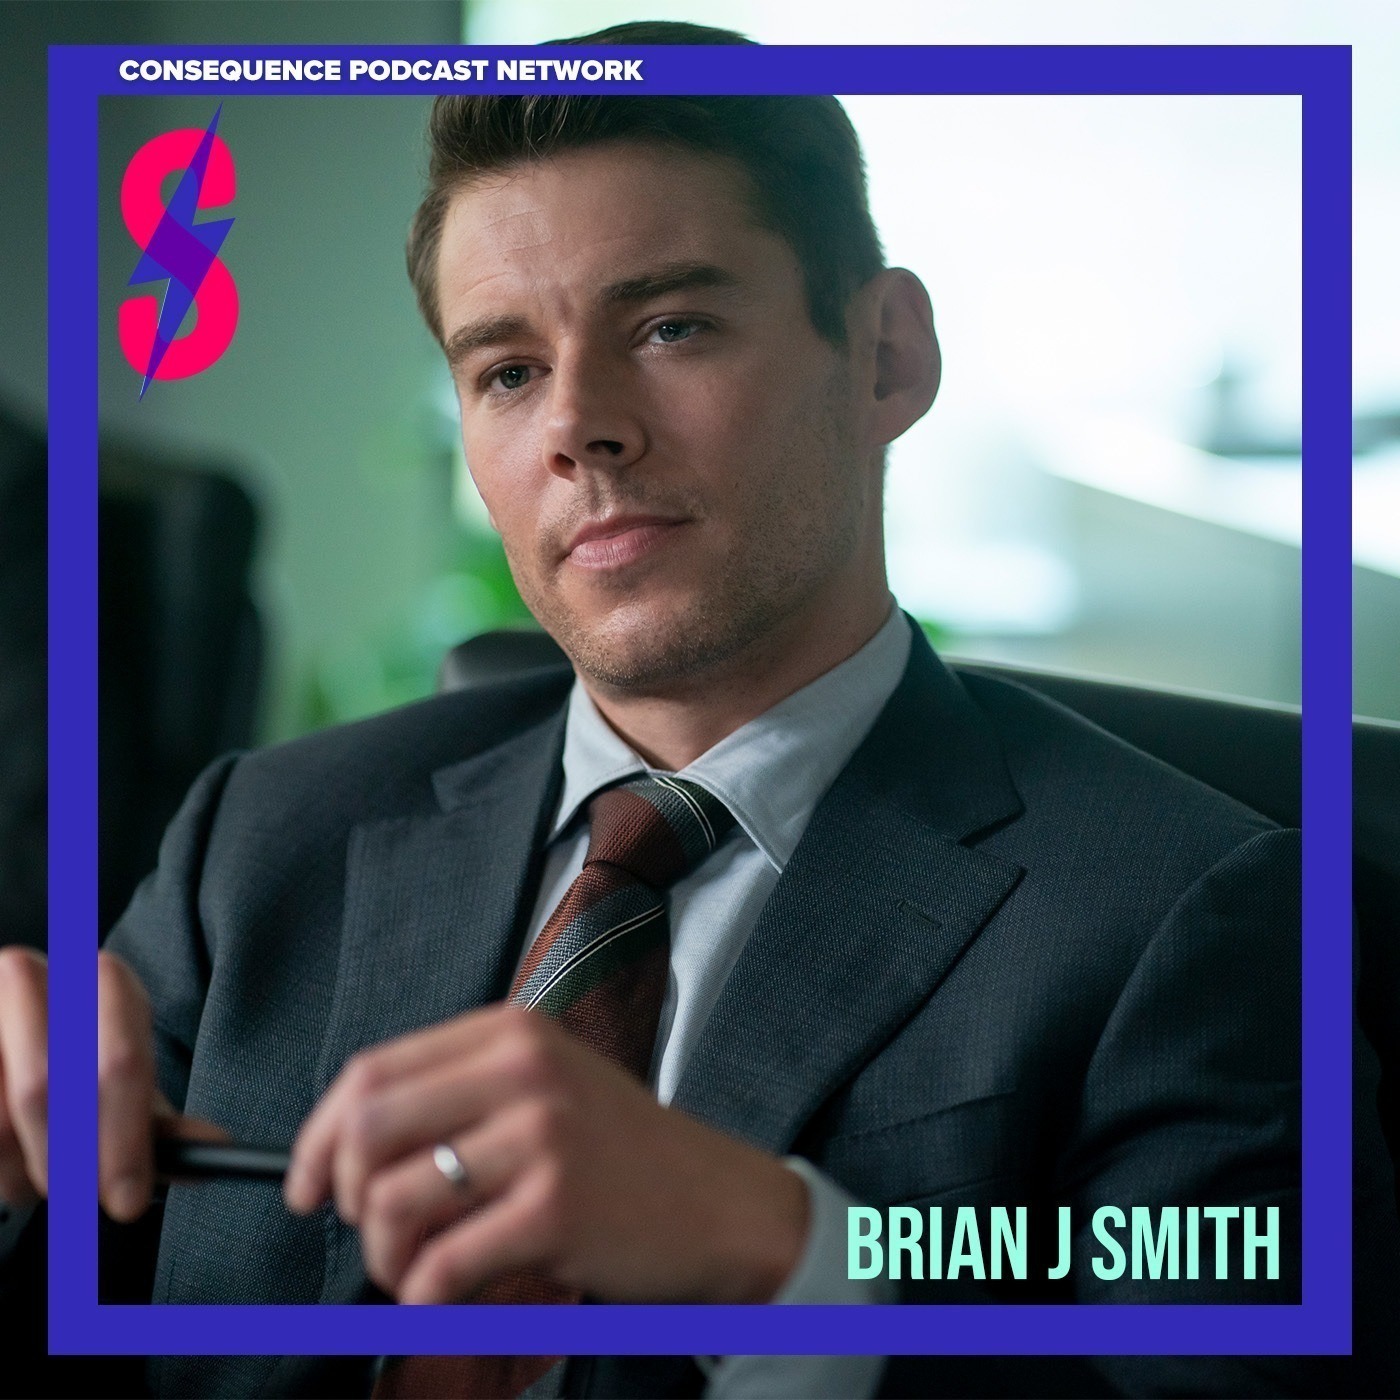 The Heart Of The Human Condition: Brian J. Smith's Spark Is A Separation